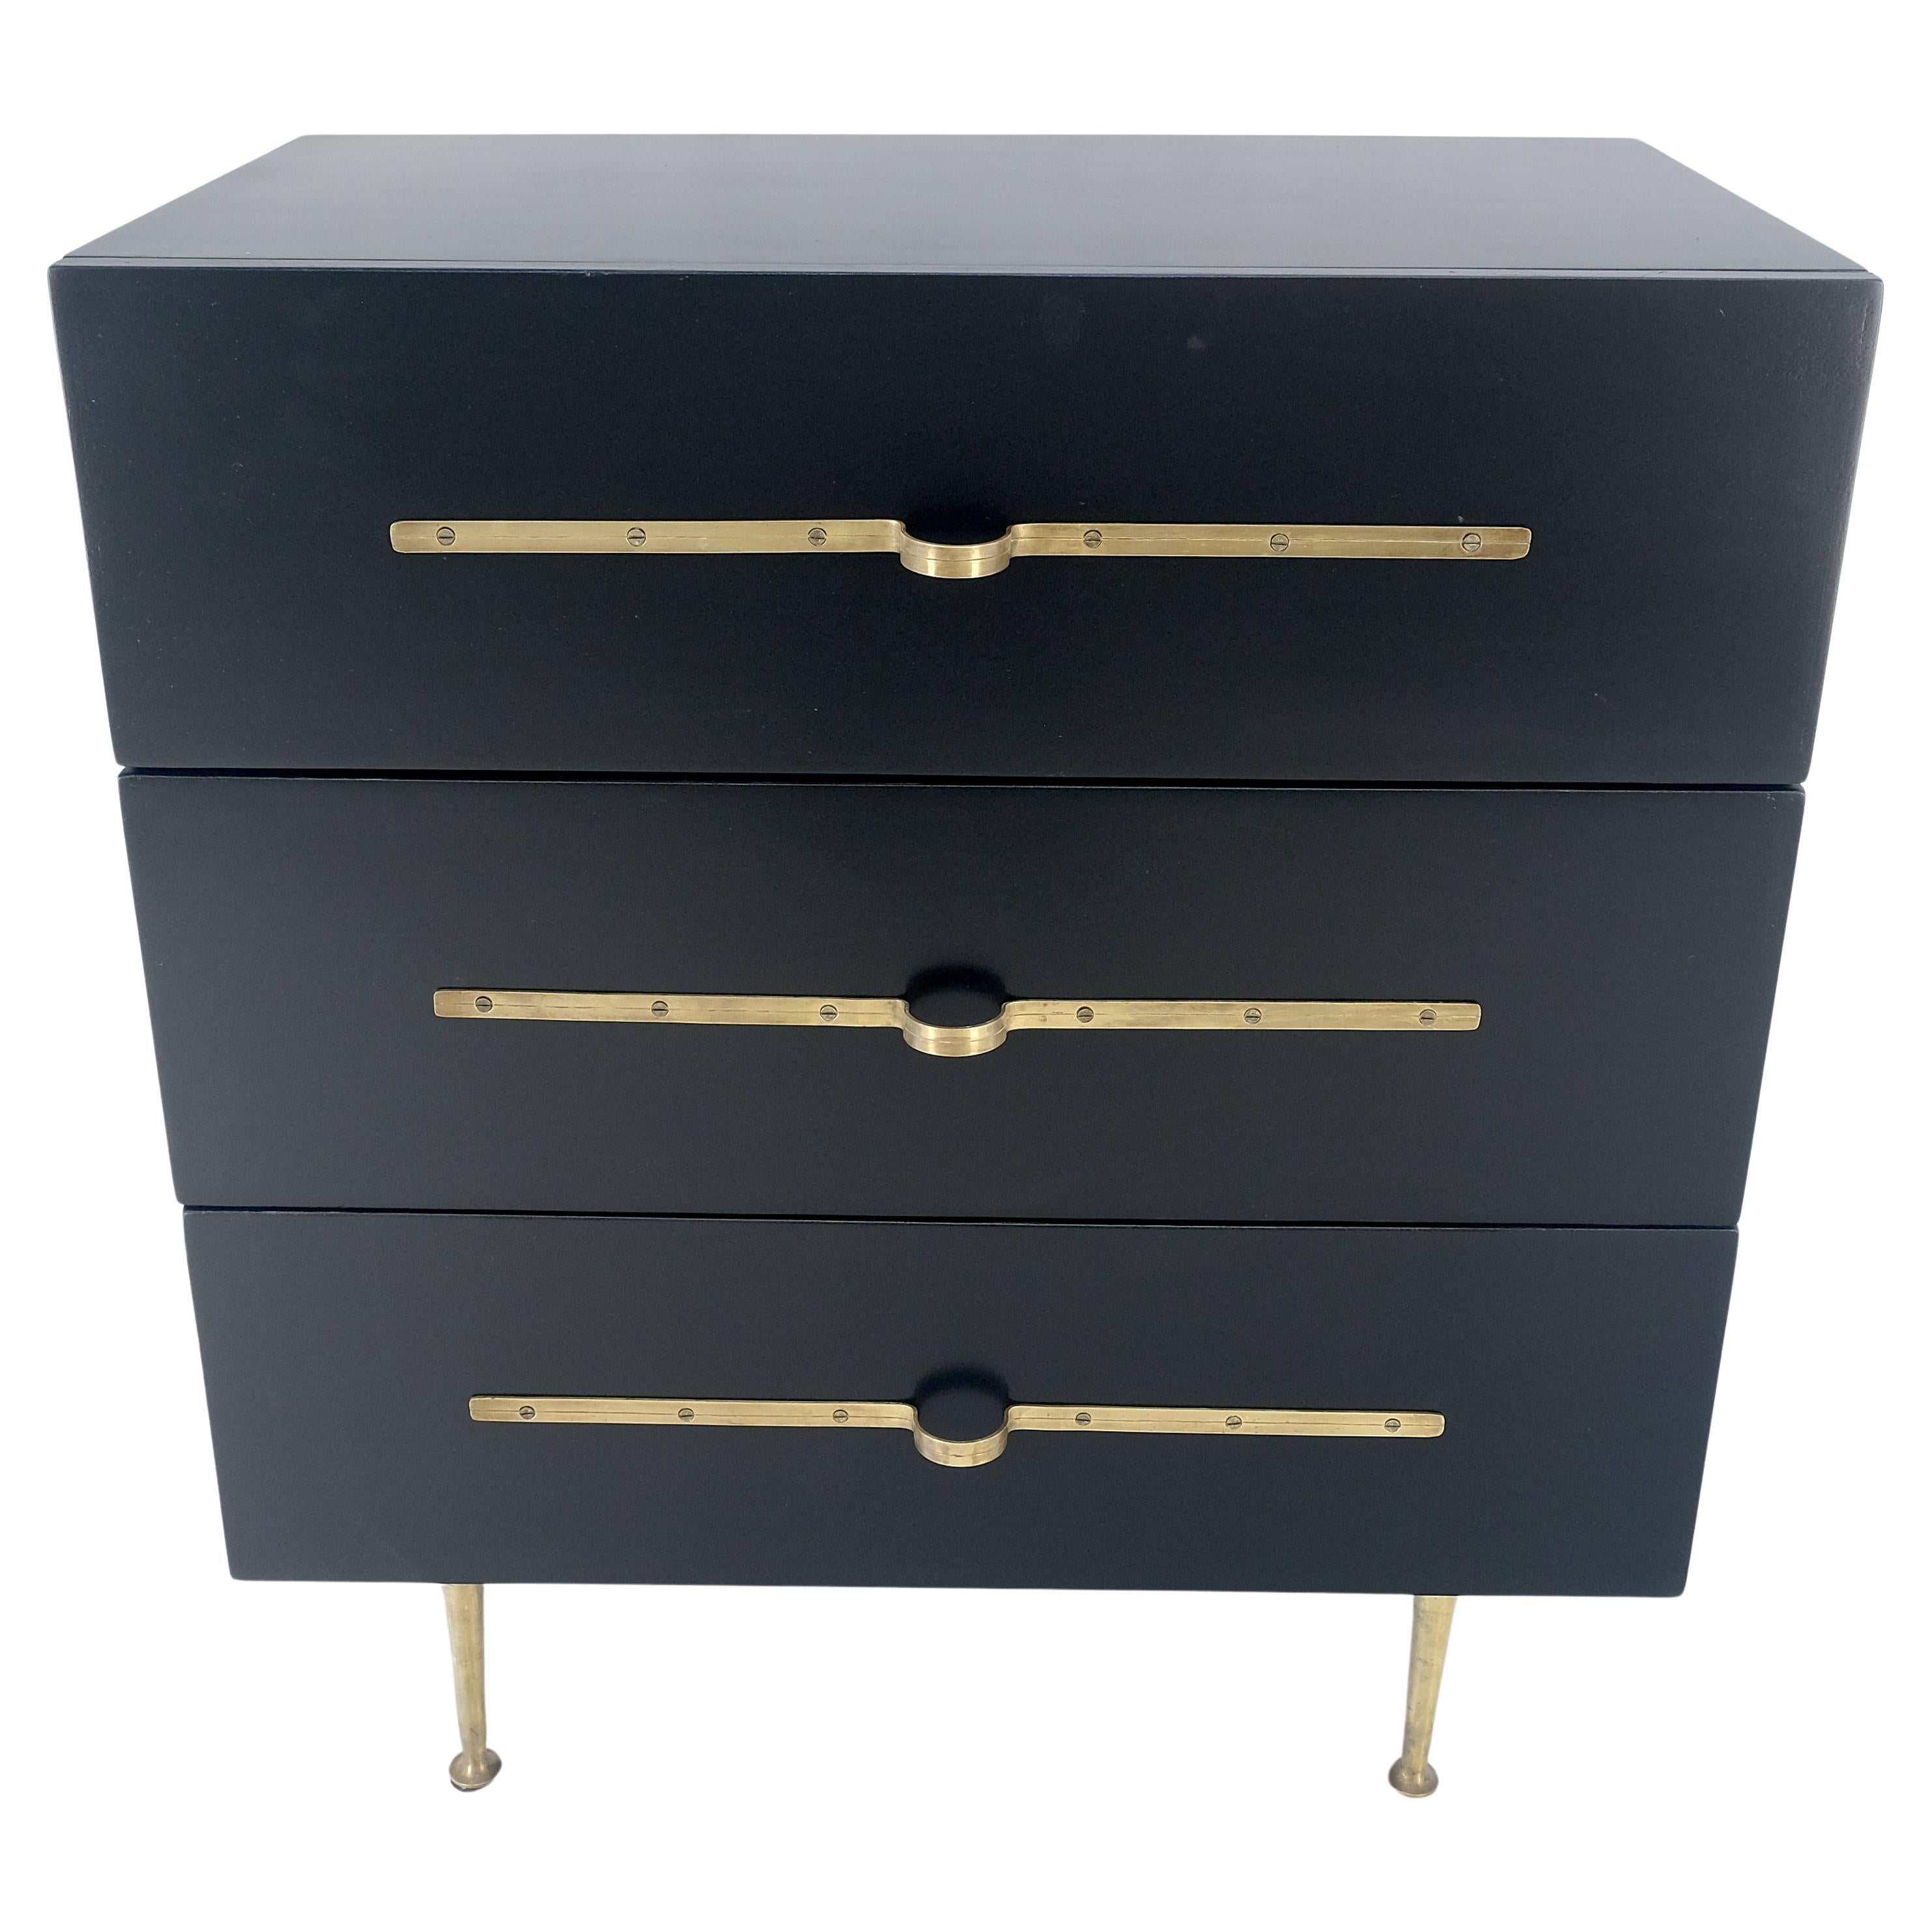 Black Lacquer Solid Brass Decorative Hardware 3 Drawers Bachelor Chest Dresser 